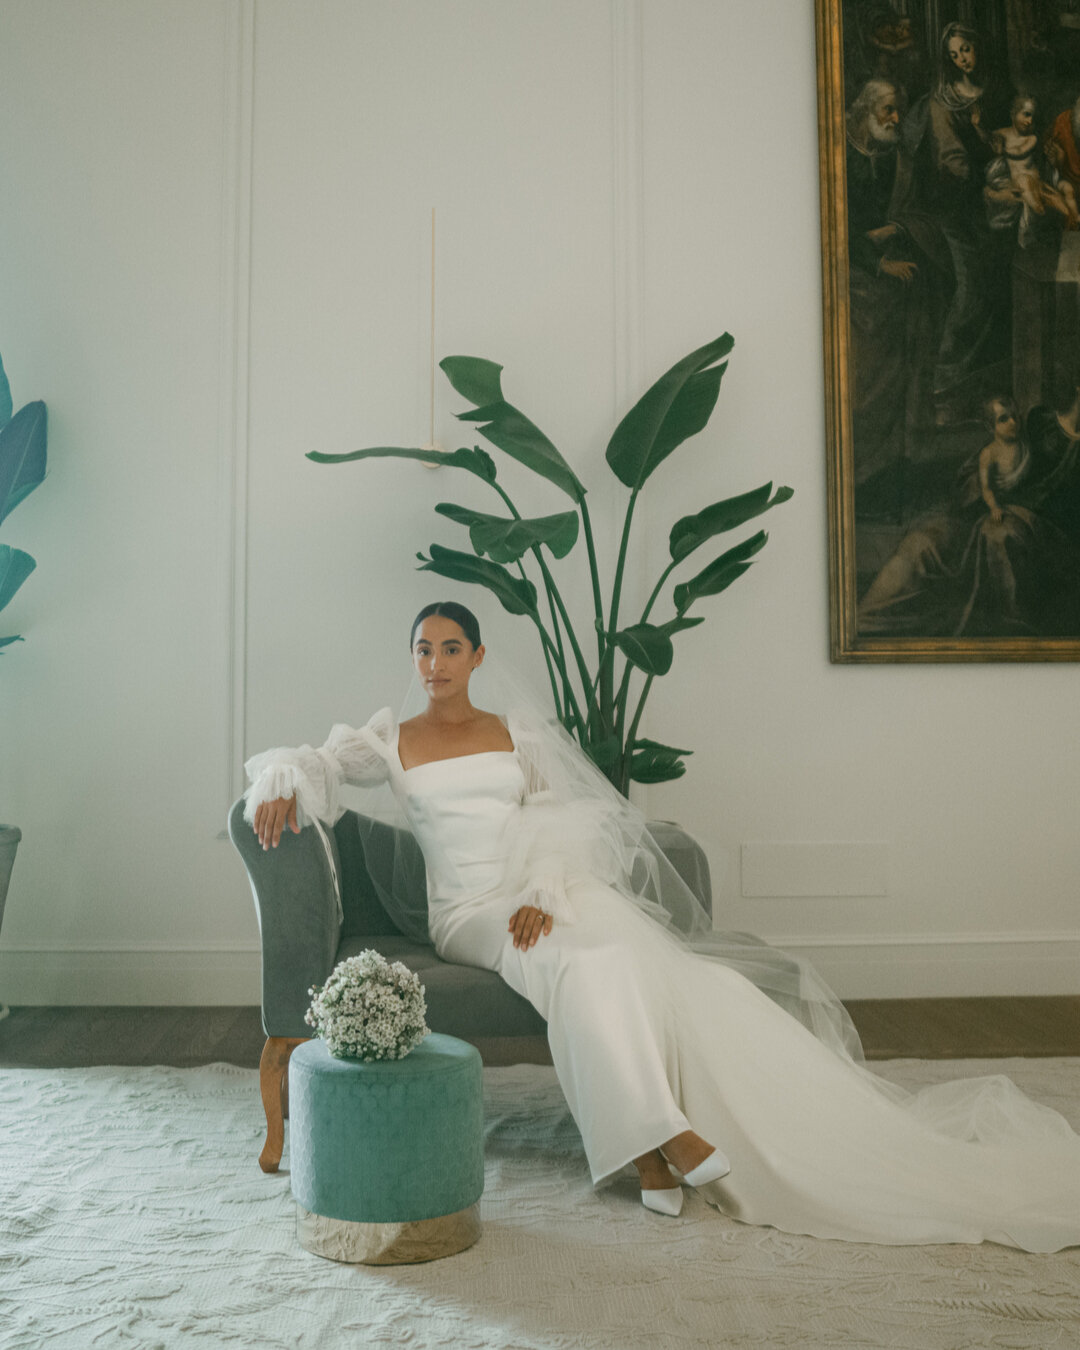 Capturing the beauty and grace of Alejandra in a quiet moment, minutes before heading to the ceremony to be united with her love.​​​​​​​​​
Venue @&zwnj;fstaormina
On the Day Photographer @&zwnj;arevelo.co_
Makeup @&zwnj;nelli_made
.
.
.
#leica #weddi